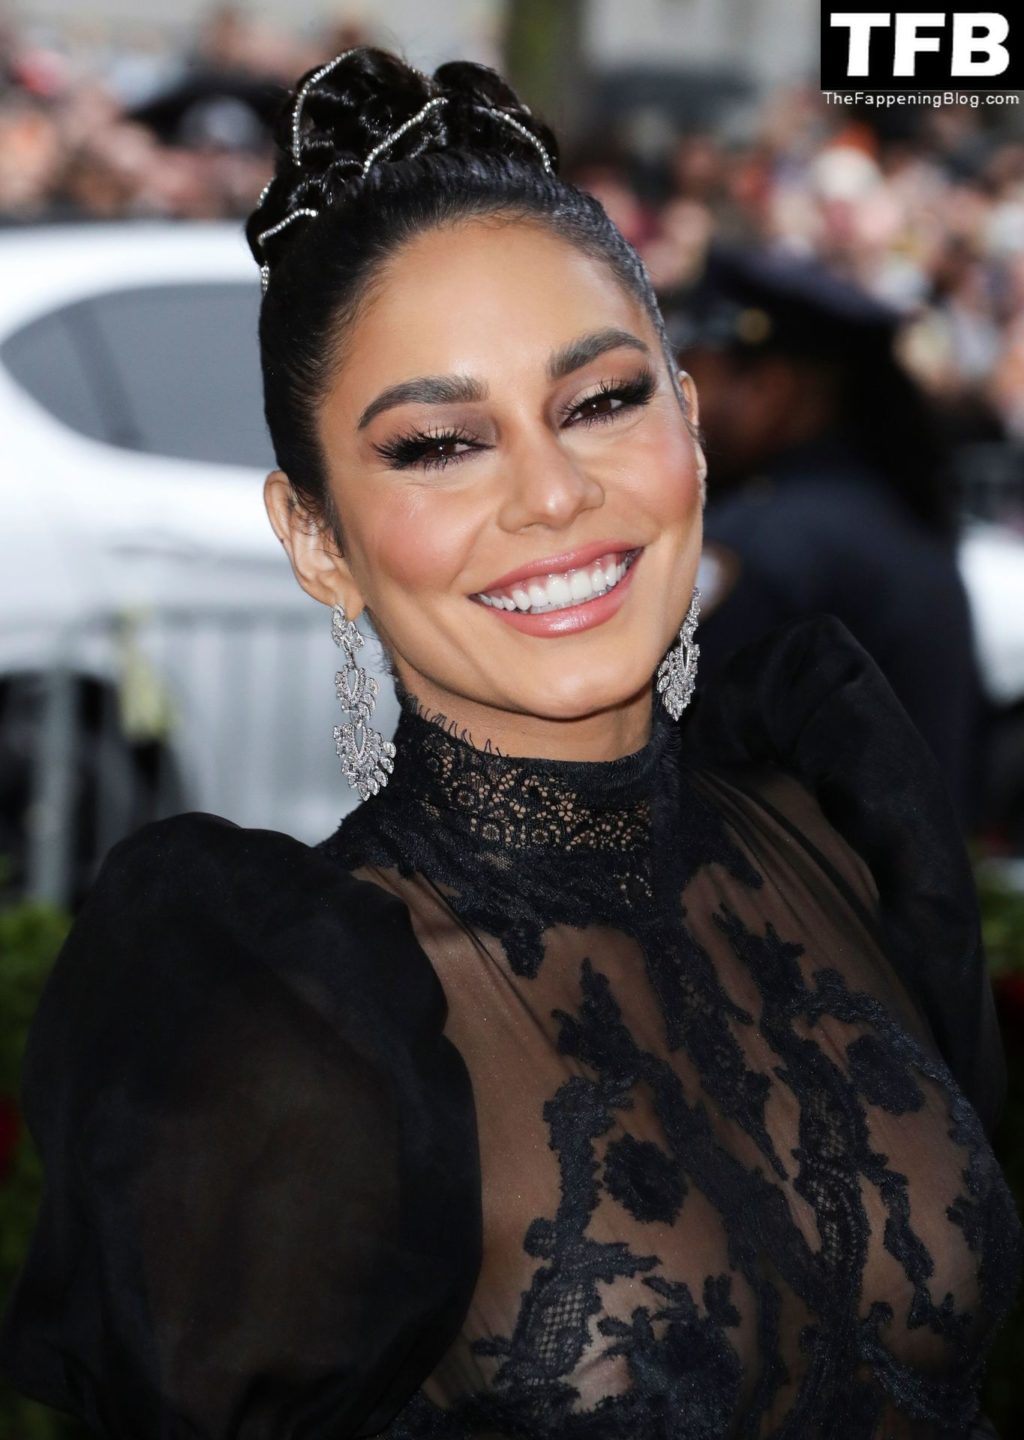 Vanessa Hudgens Sexy The Fappening Blog 3 1 1024x1440 - Vanessa Hudgens Looks Stunning in a See-Through Dress at The 2022 Met Gala in NYC (99 Photos)